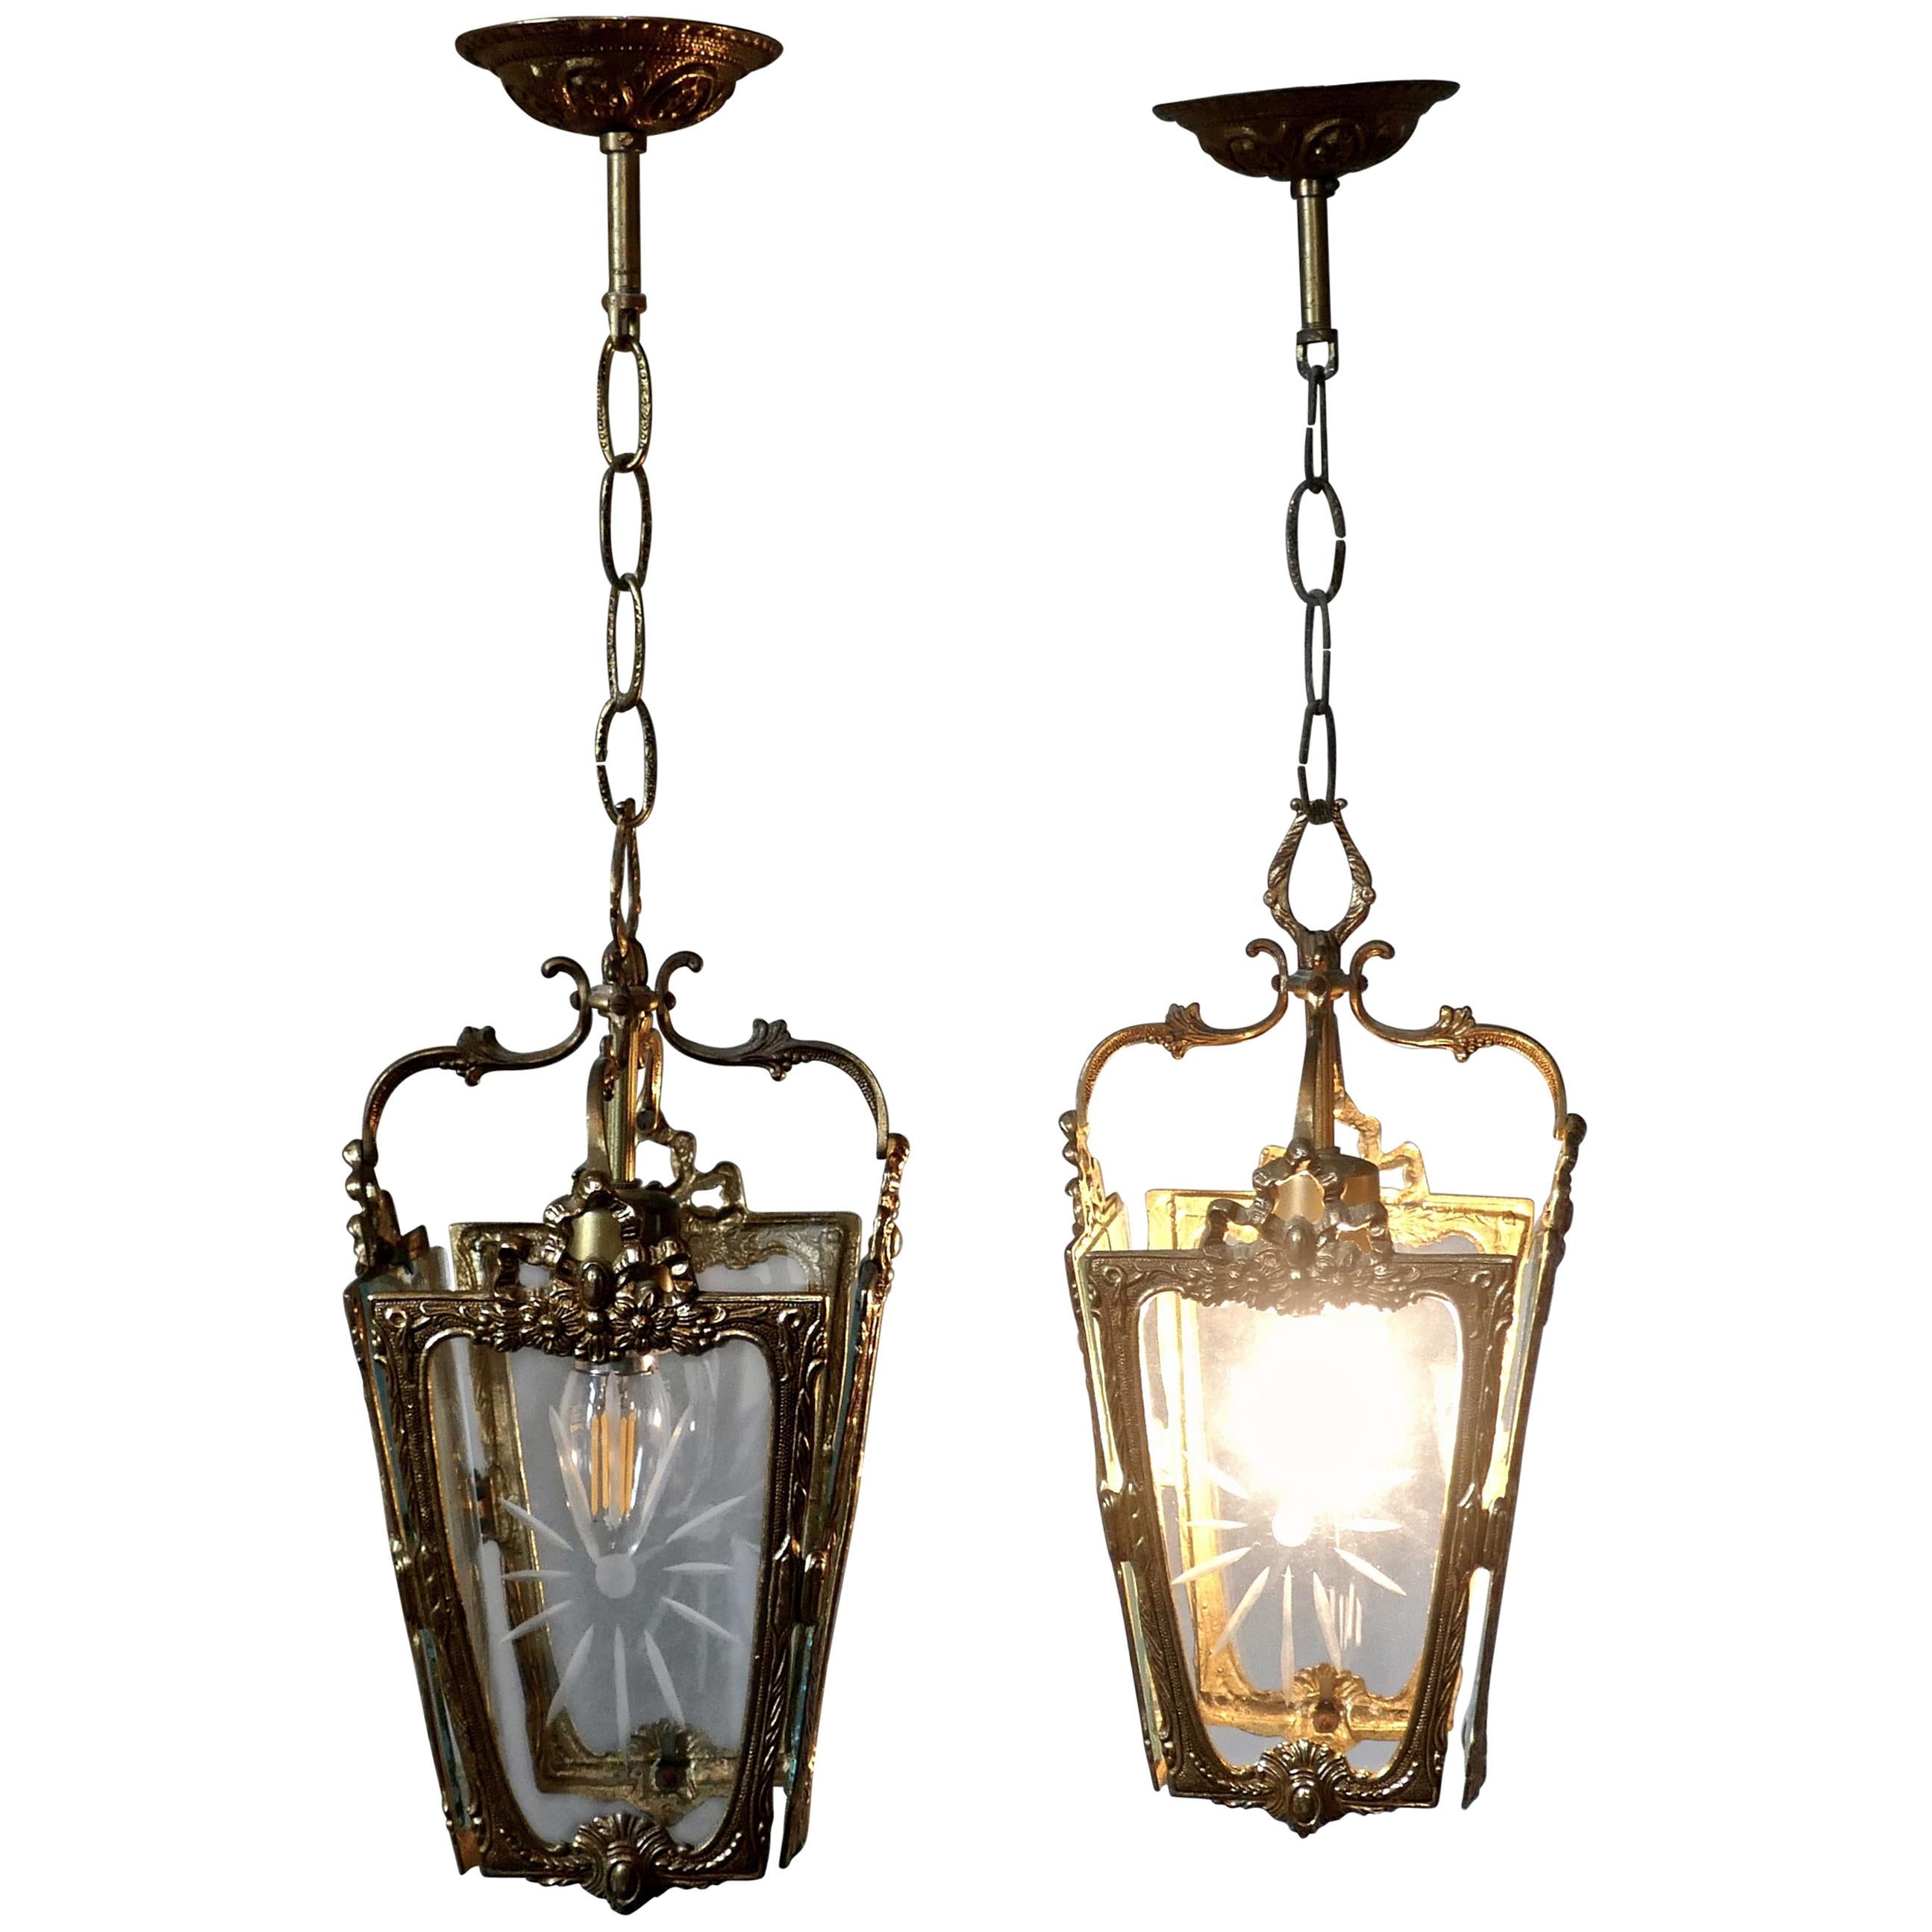 Pair of Superb Quality French Rocco Brass and Etched Glass Lantern Hall Light